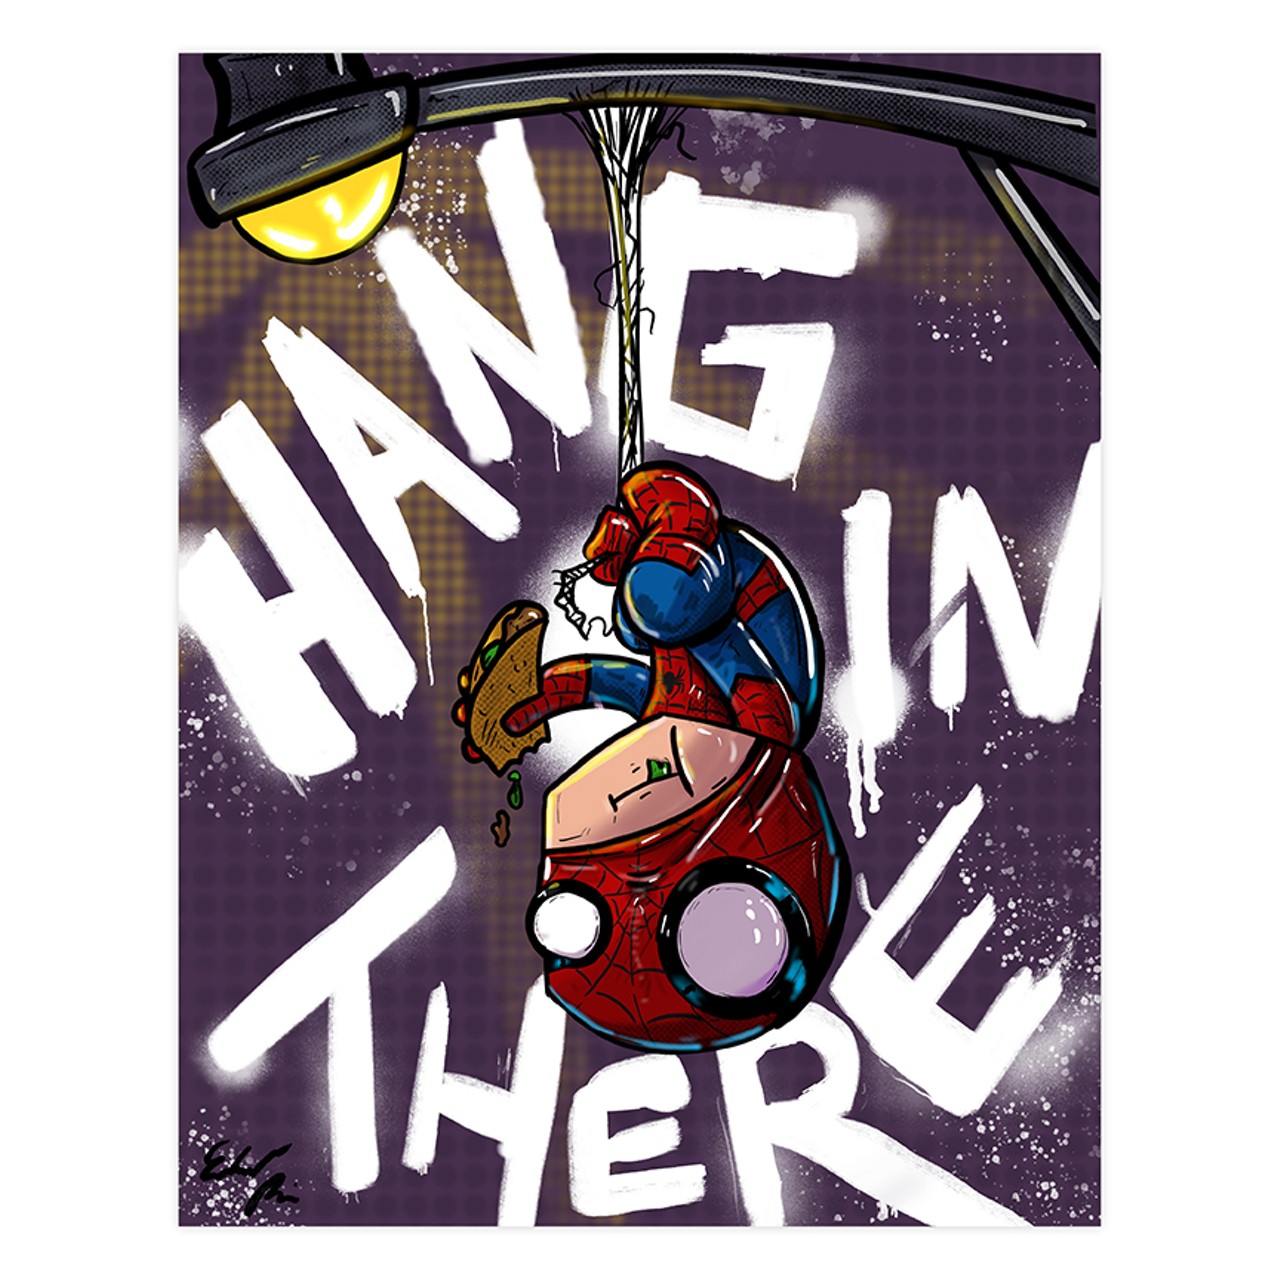 "Hang In There" by Eddy Rios